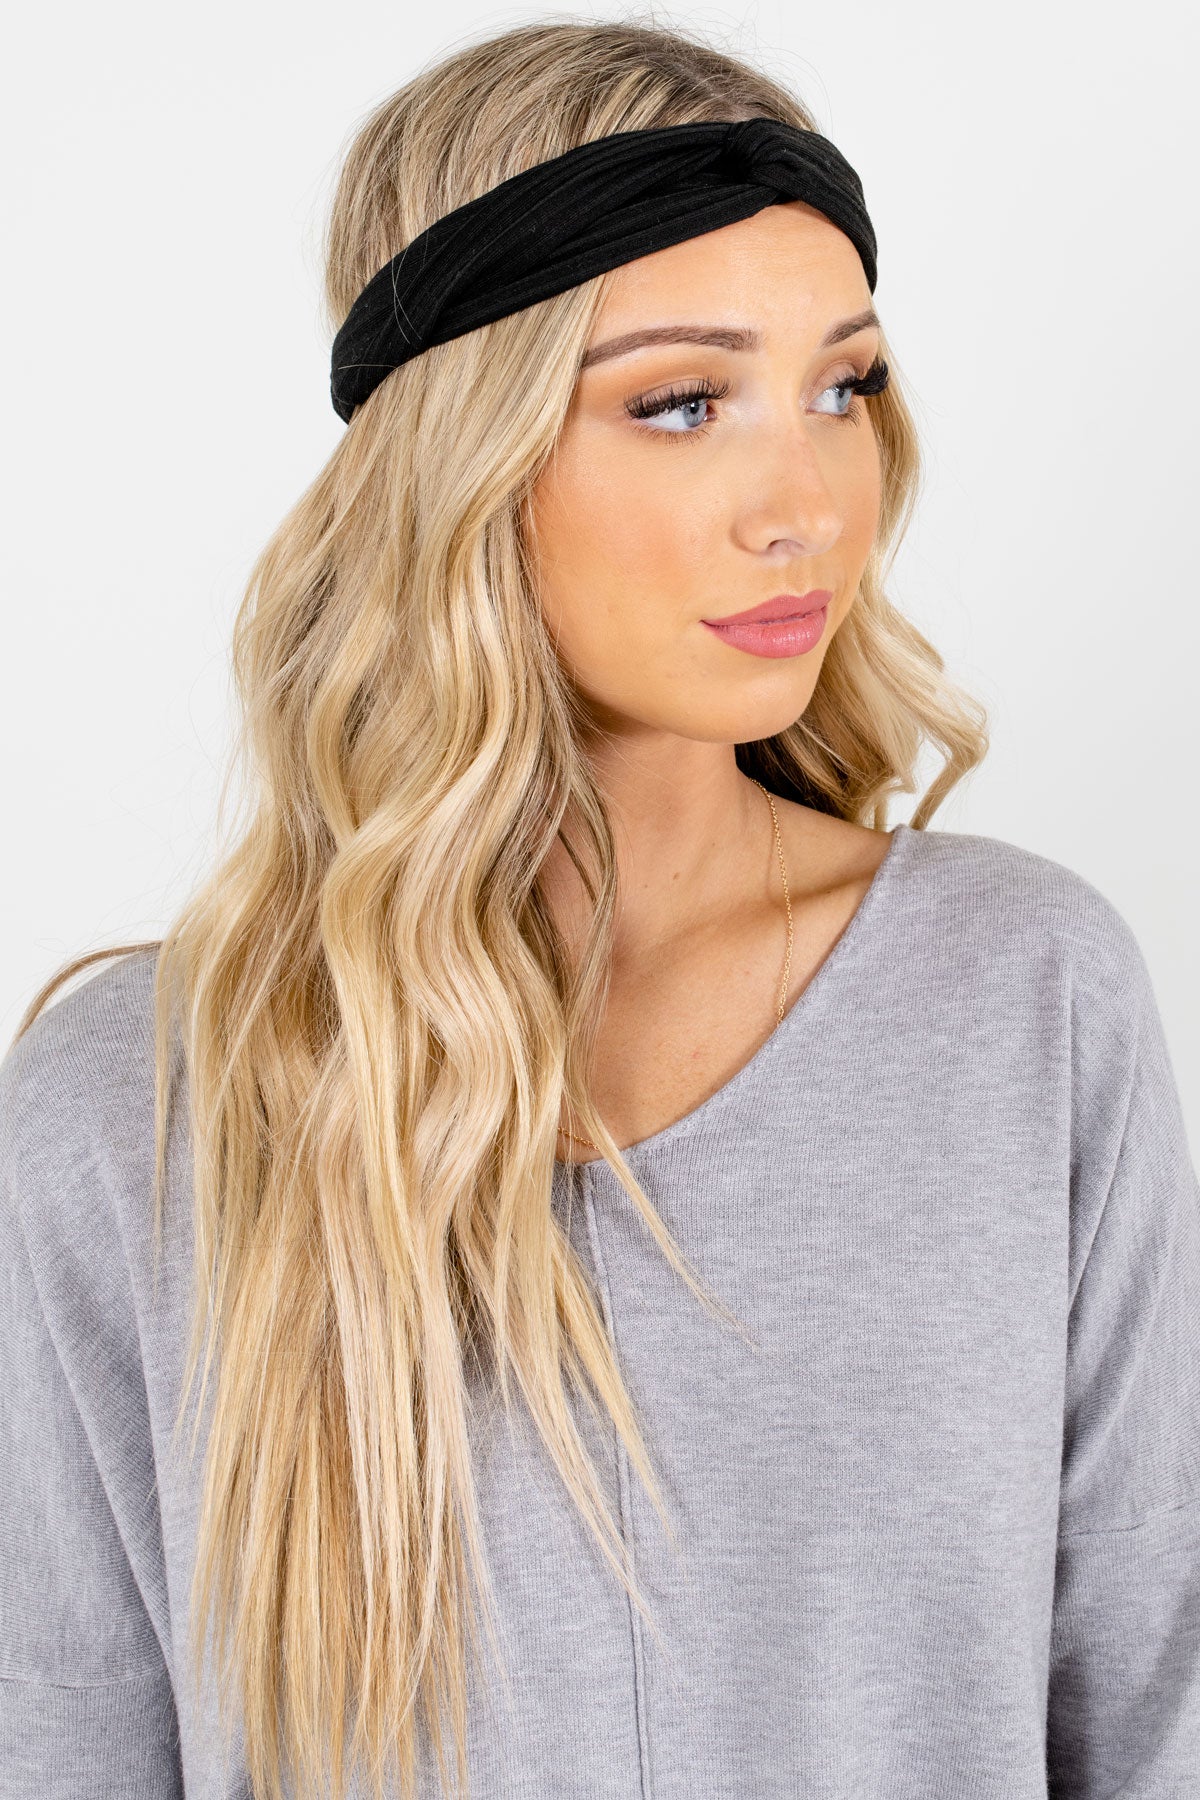 Black Ribbed Material Boutique Headbands for Women